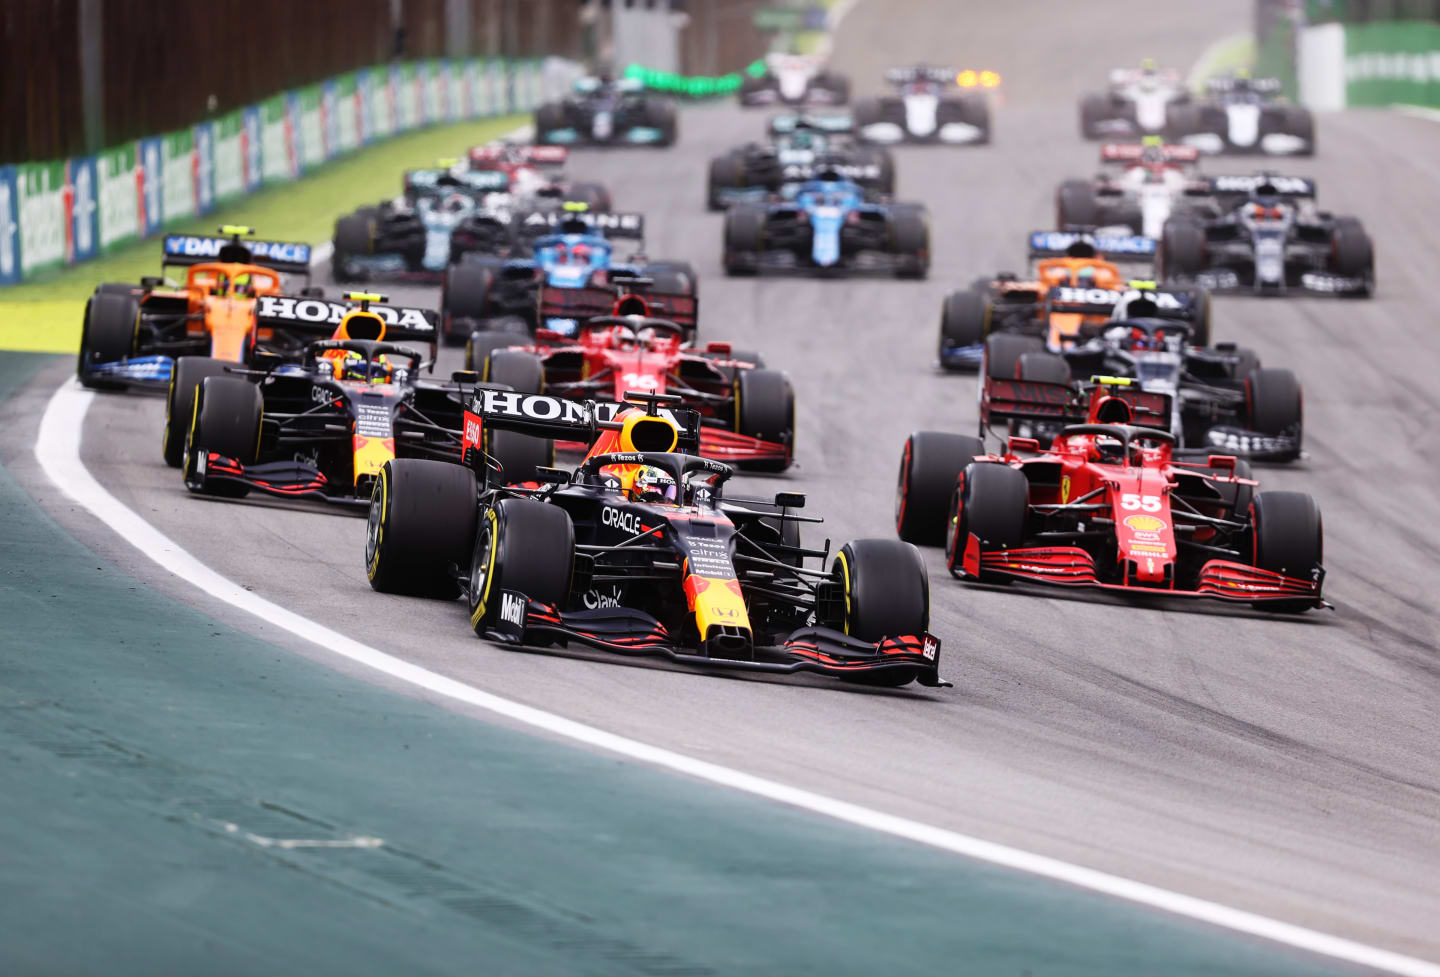 SAO PAULO, BRAZIL - NOVEMBER 13: Max Verstappen of the Netherlands driving the (33) Red Bull Racing RB16B Honda leads Sergio Perez of Mexico driving the (11) Red Bull Racing RB16B Honda and Carlos Sainz of Spain driving the (55) Scuderia Ferrari SF21 and during the sprint ahead of the F1 Grand Prix of Brazil at Autodromo Jose Carlos Pace on November 13, 2021 in Sao Paulo, Brazil. (Photo by Lars Baron/Getty Images)